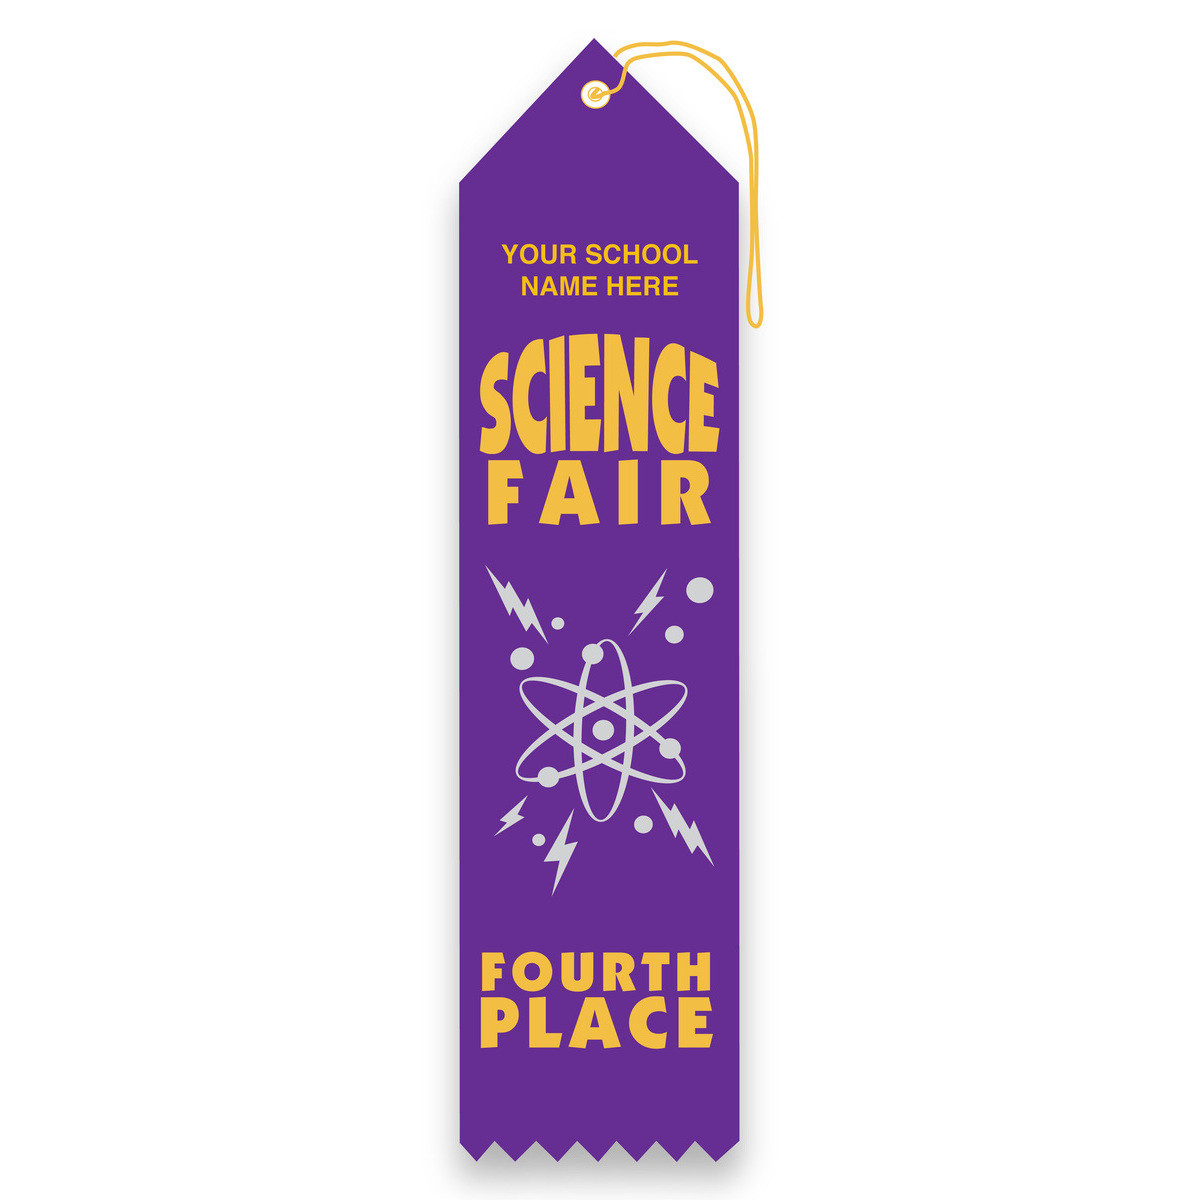 Imprinted Carded Ribbon - Science Fair, 4th Place